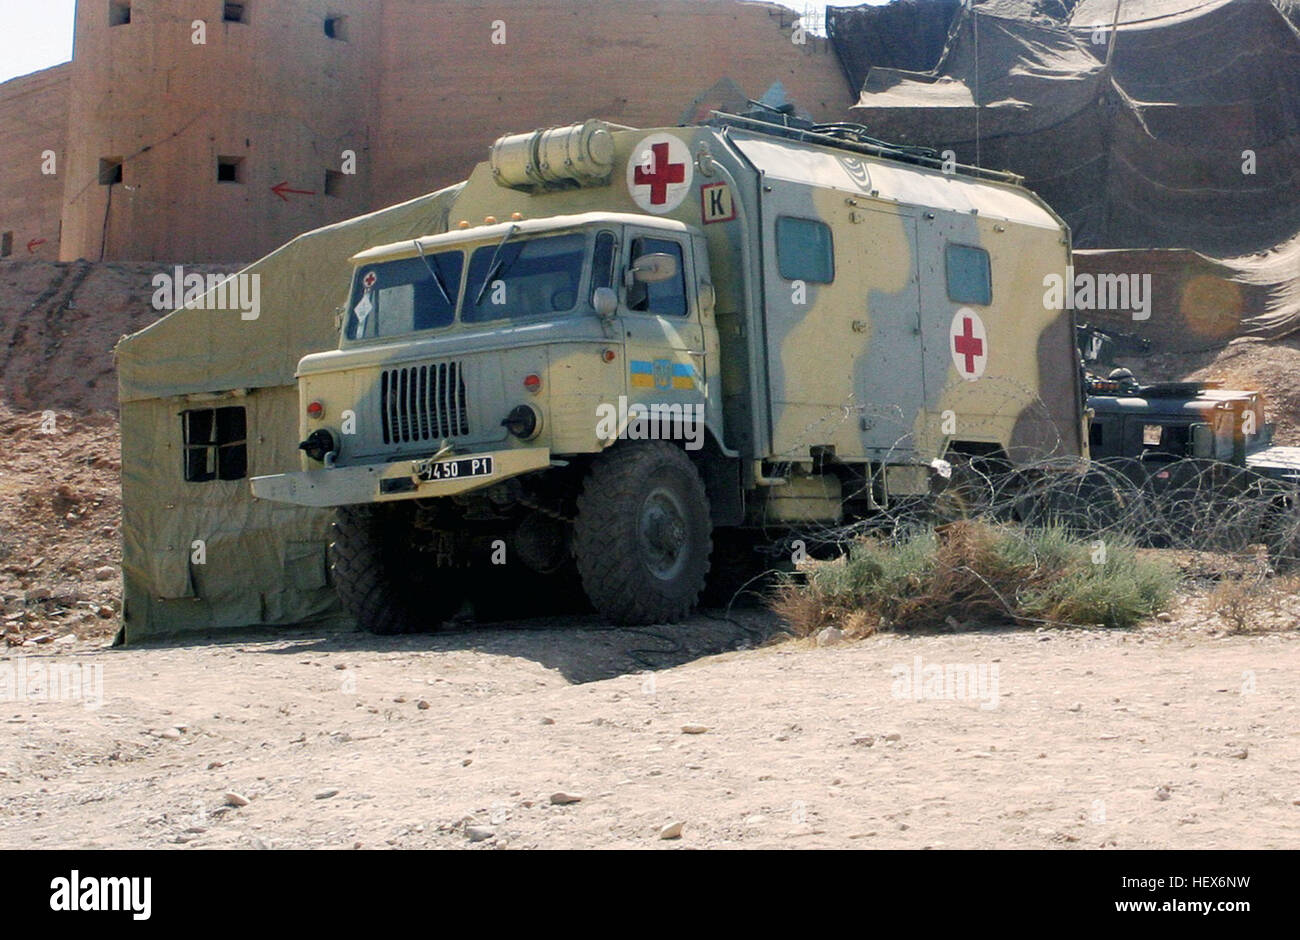 A Ukraine Army GAZ-66 (4X4) 2,000kg Ambulance Van sits with US Marine Corps (USMC) High-Mobility Multipurpose Wheeled Vehicles, assigned to India/Company, 3rd Battalion, 23rd Marine Regiment, outside a fortified structure near the Iran/Iraq border crossing located at Badrah, Iraq, during Operation IRAQI FREEDOM, as Ukraine Military Forces prepare to take command of the local area. Ukranian ambulance in Iraq Stock Photo